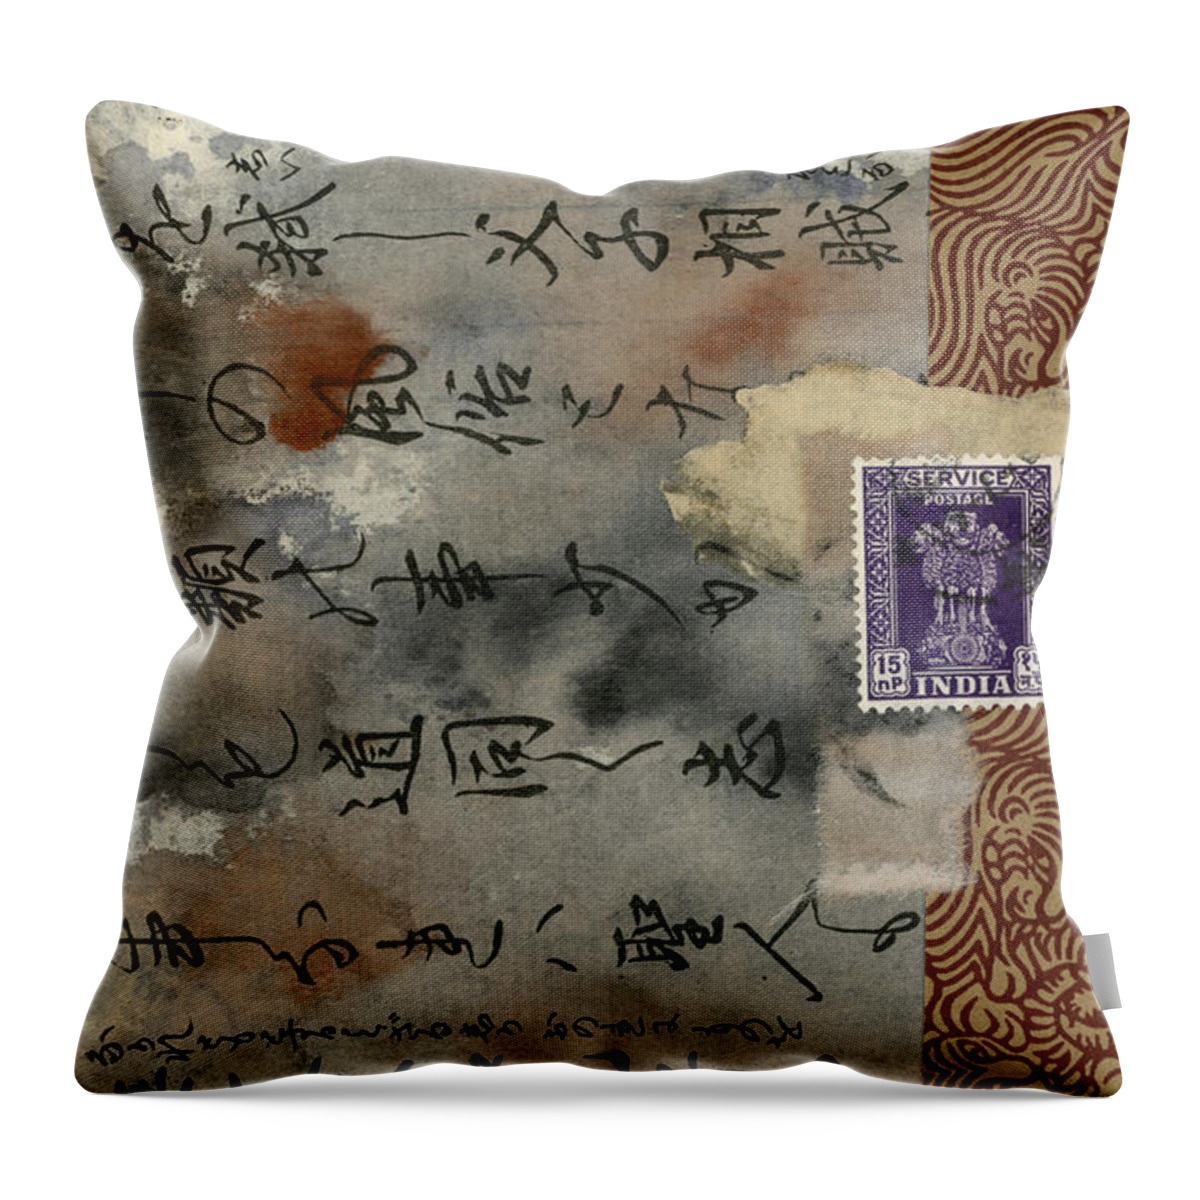 Postcard Throw Pillow featuring the photograph Postcard from India Collage by Carol Leigh